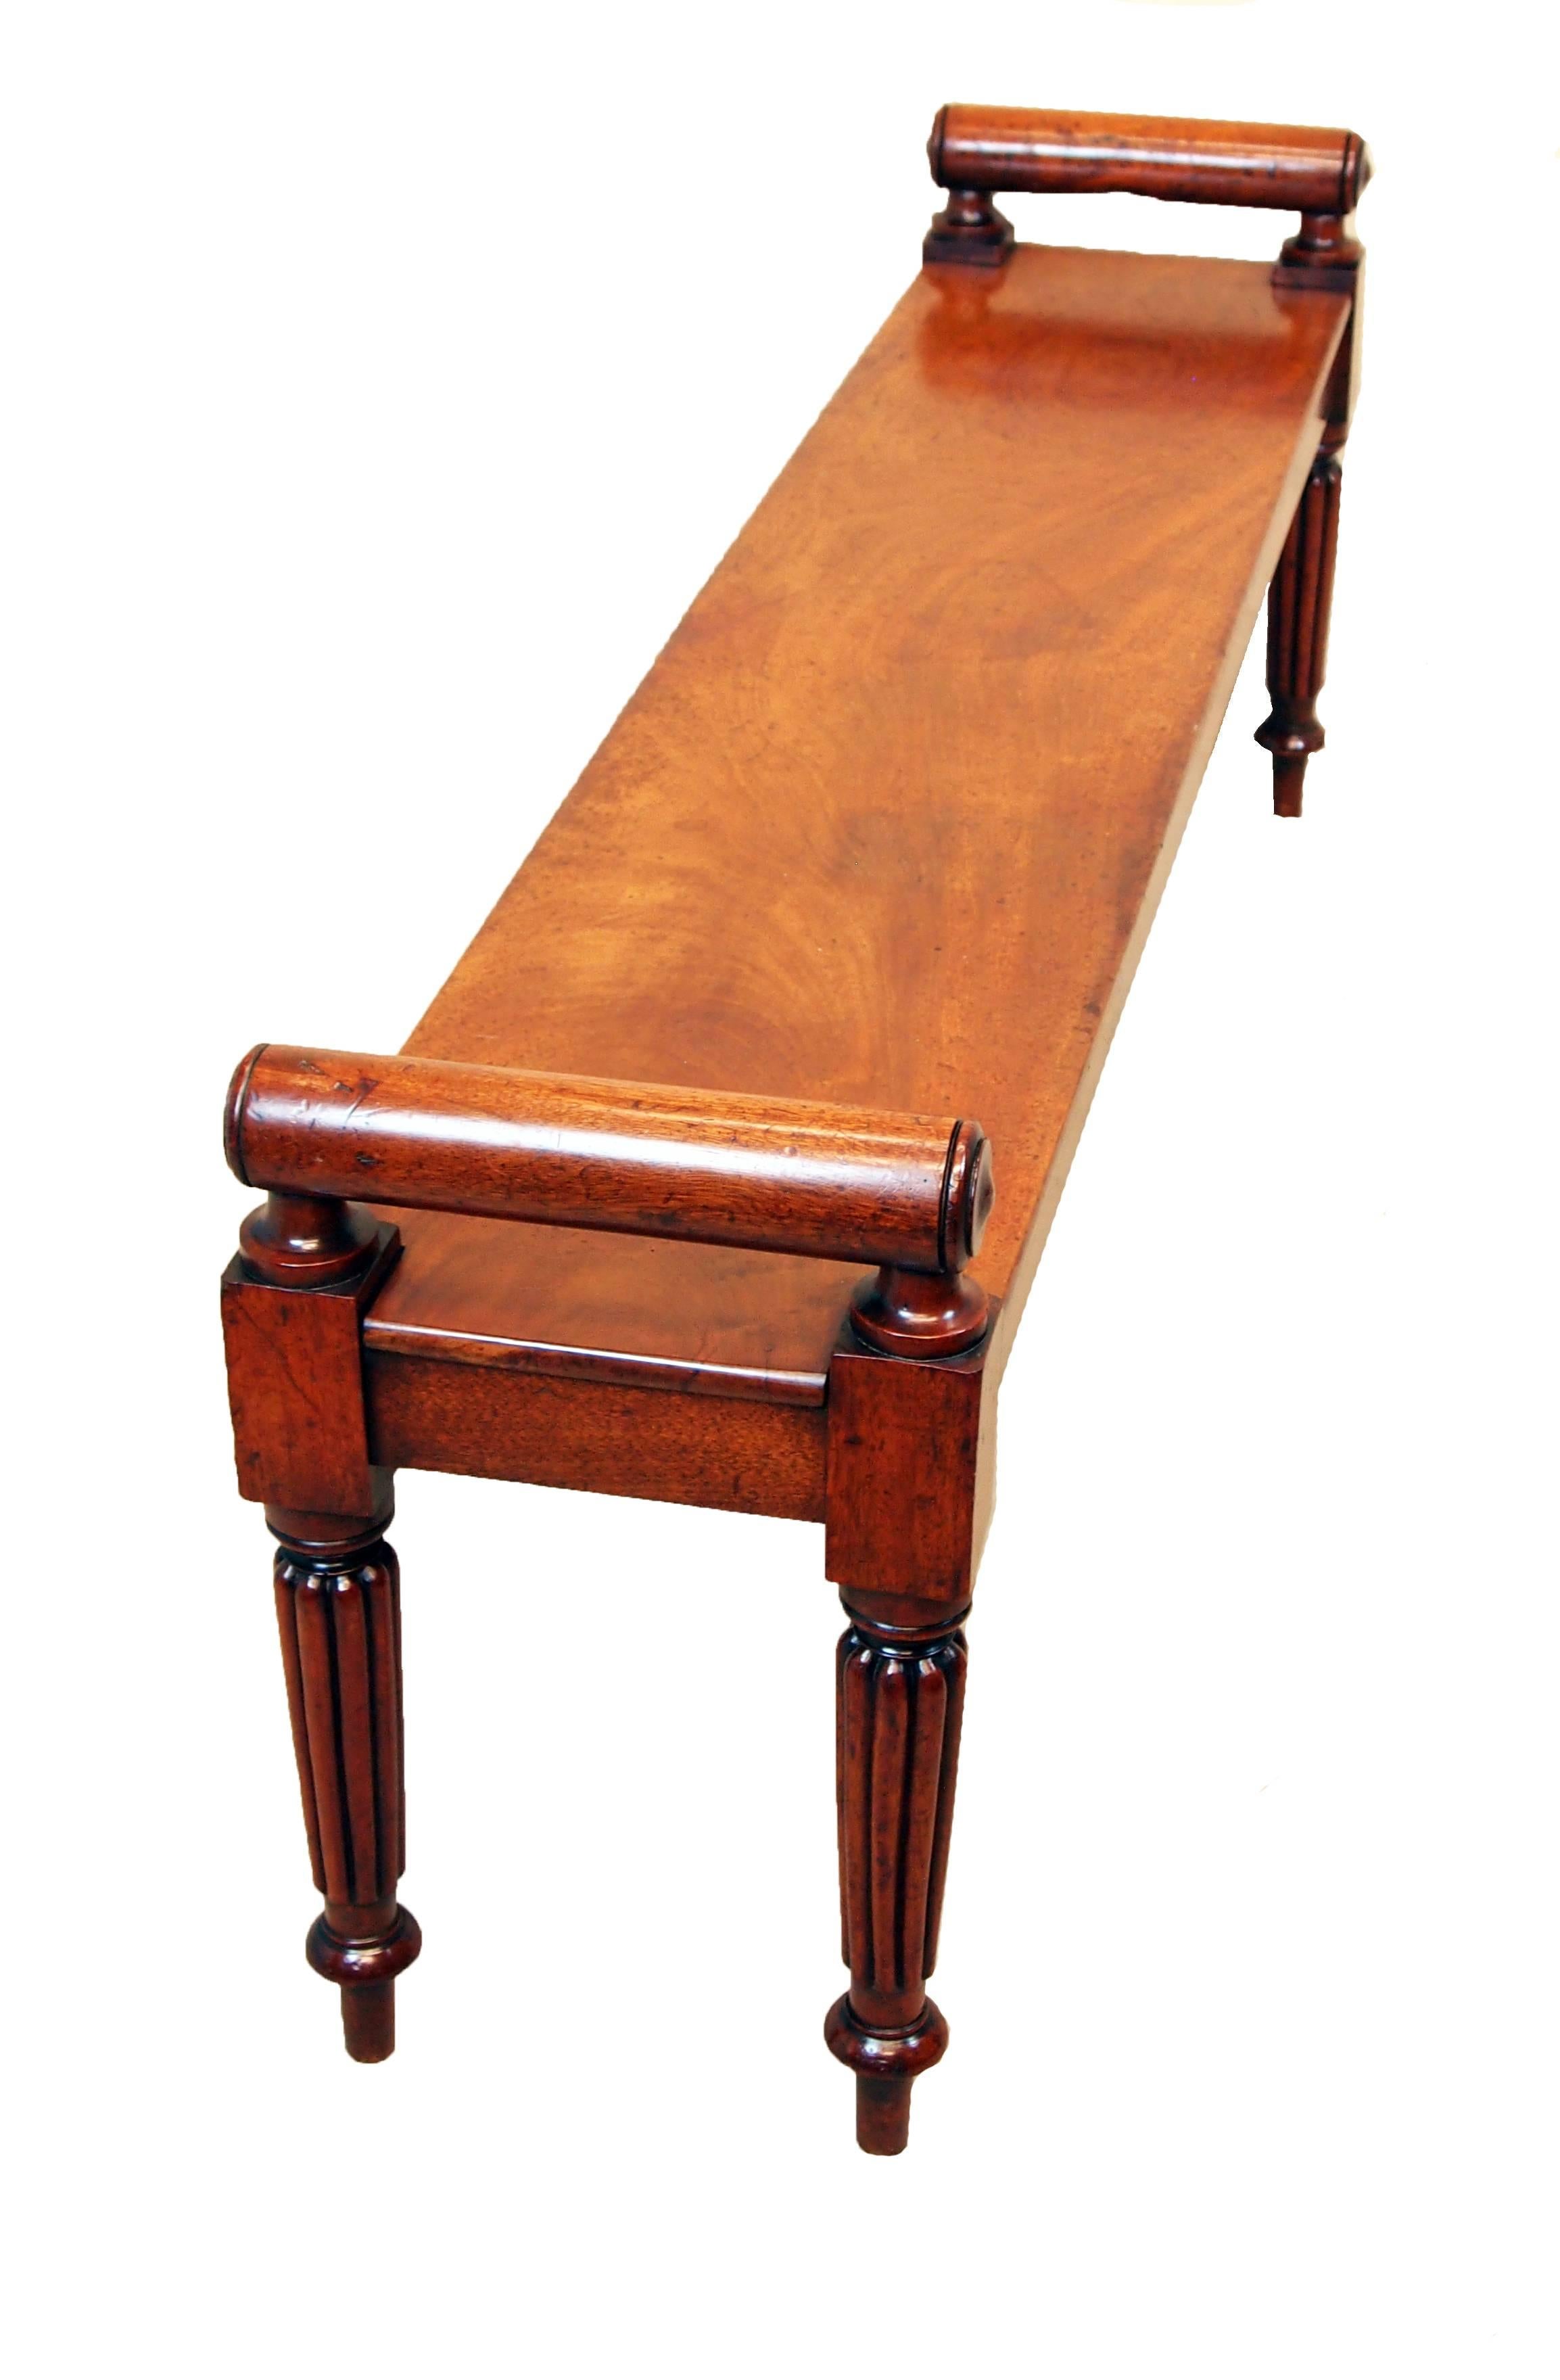 A very good quality late regency period mahogany hall bench
of large proportions having turned rolls to raised ends above
well figured seat standing on elegant reeded, turned and
tapering legs.